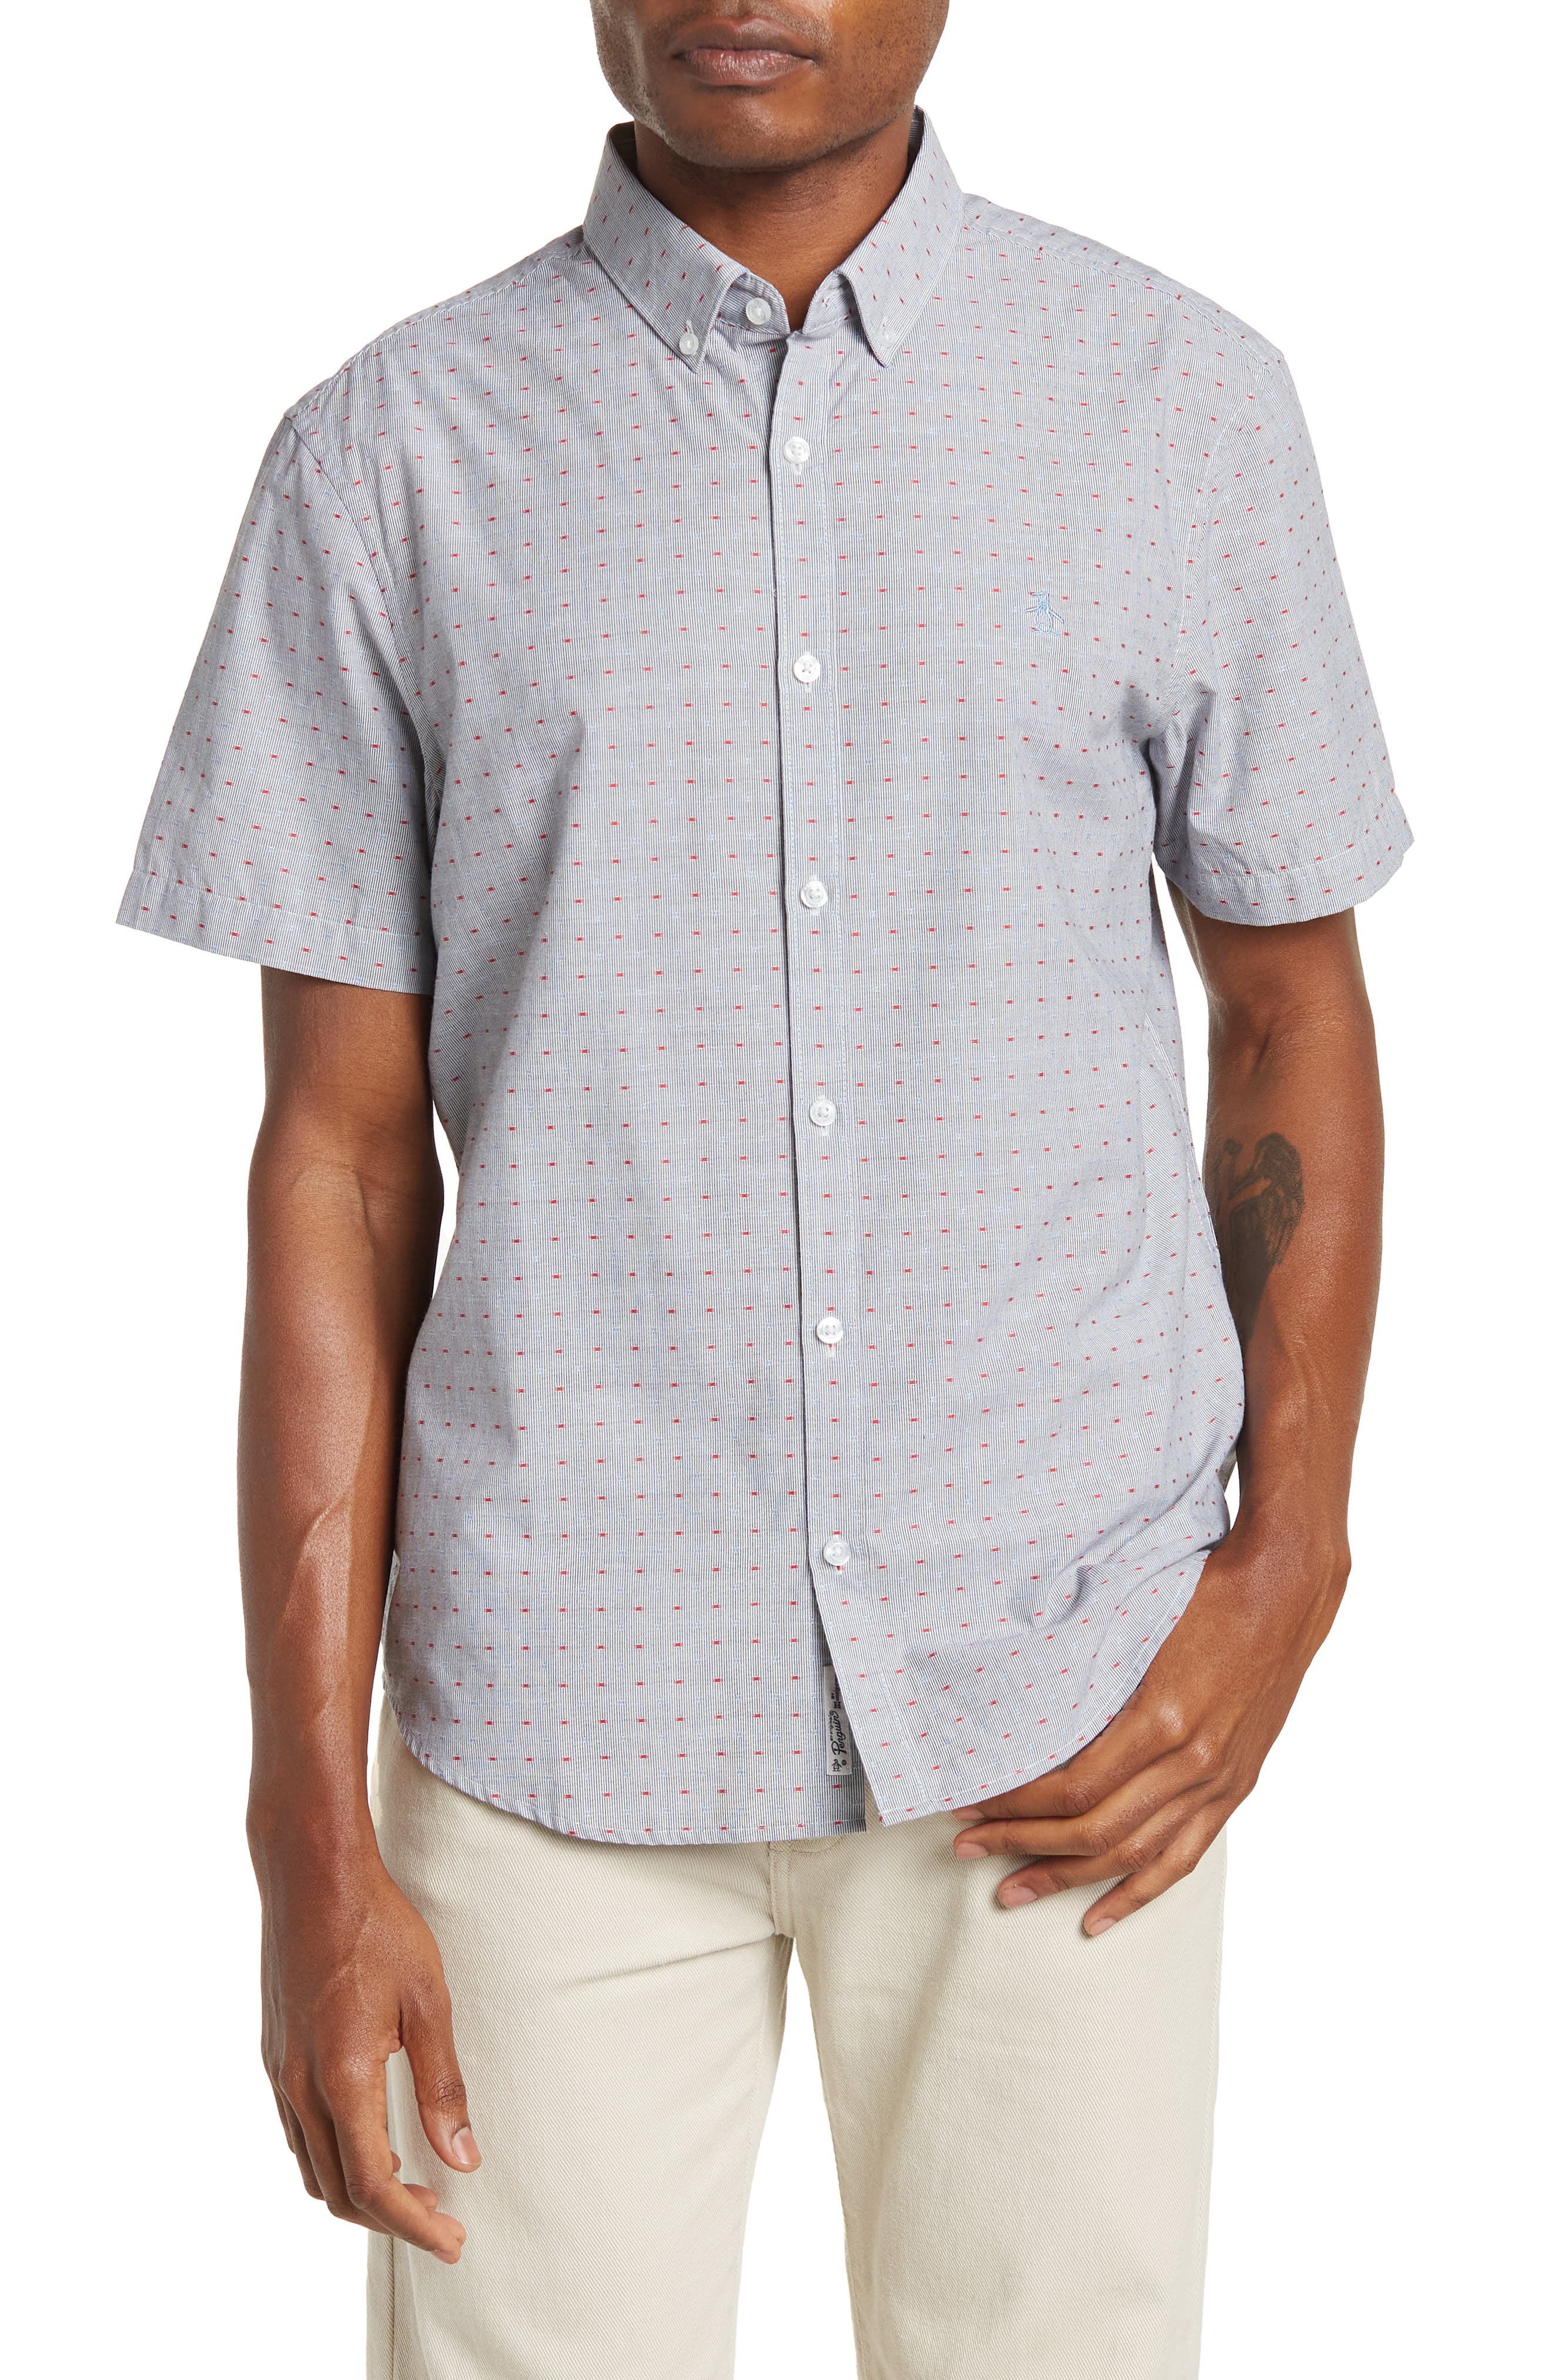 Original Penguin Mens Big and Tall Short Sleeve Knit Button Down 